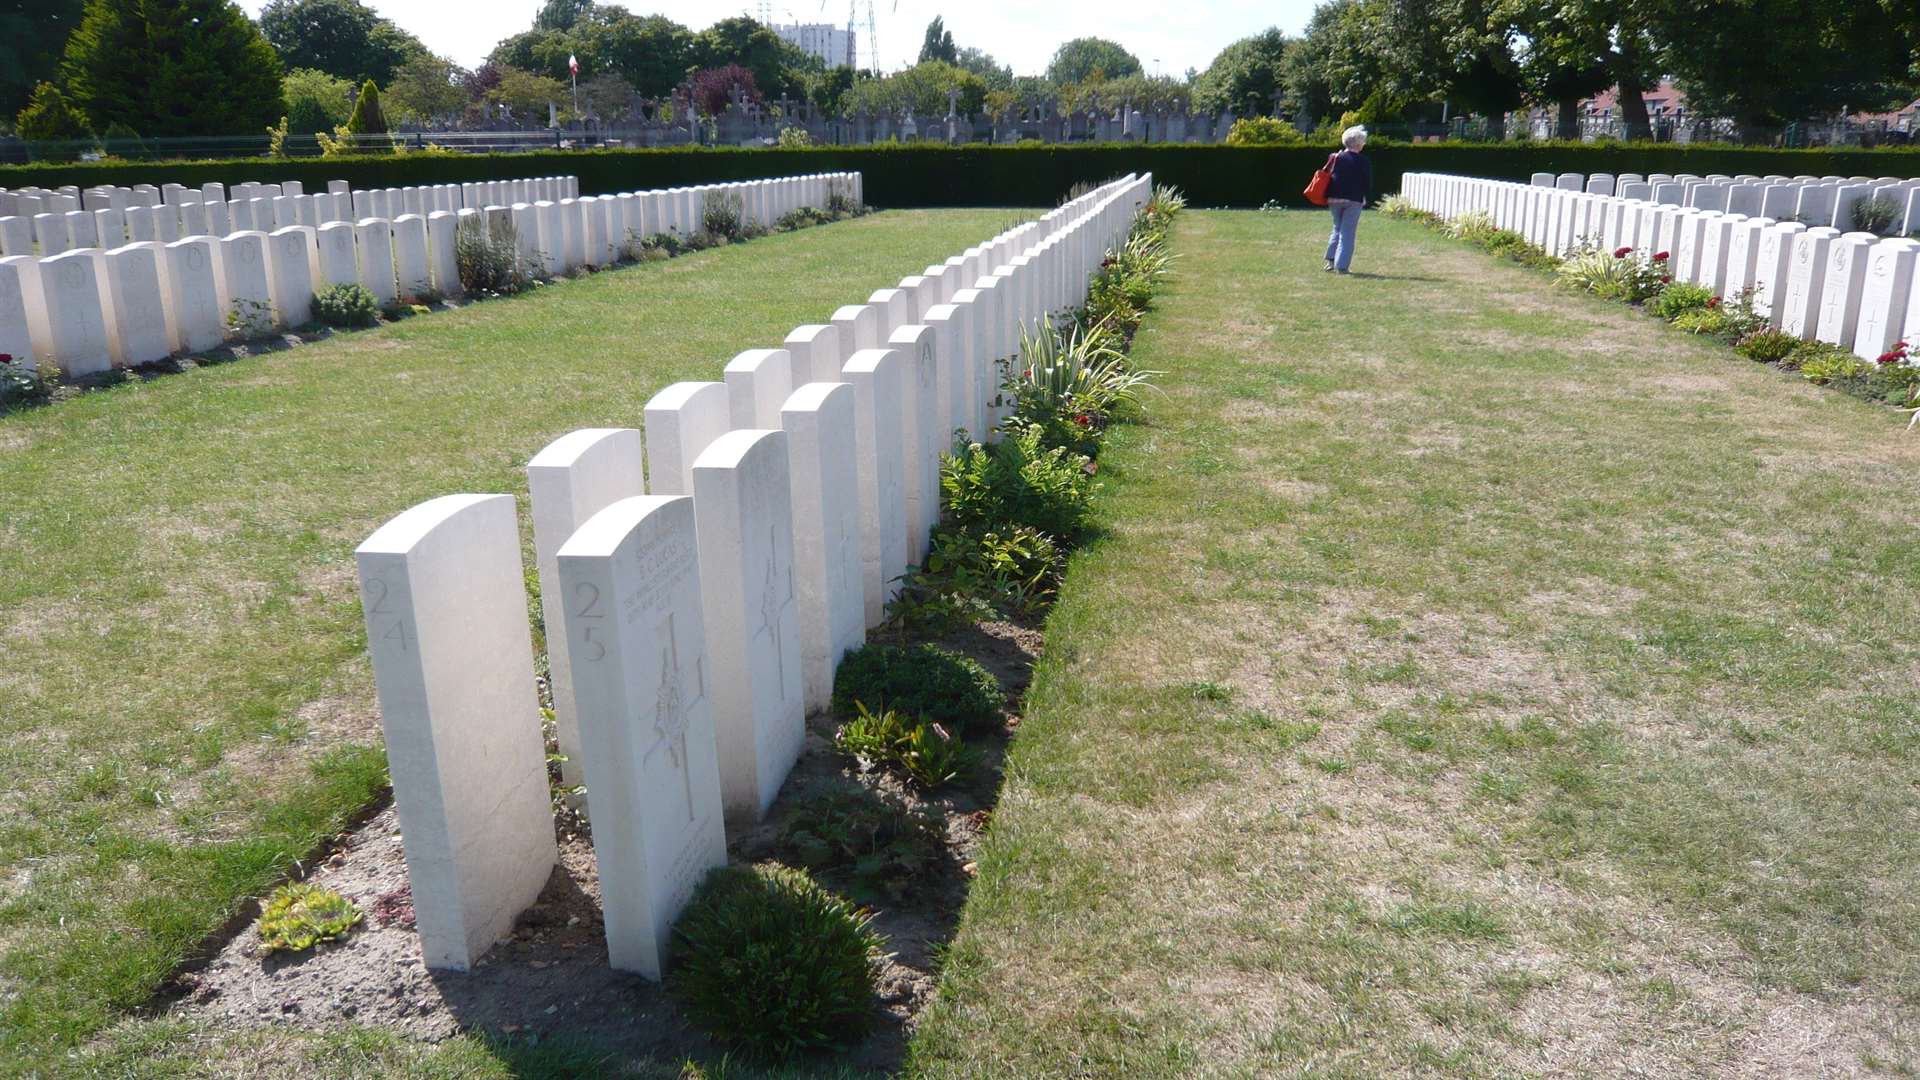 Rows of graves line the British Cemetery.